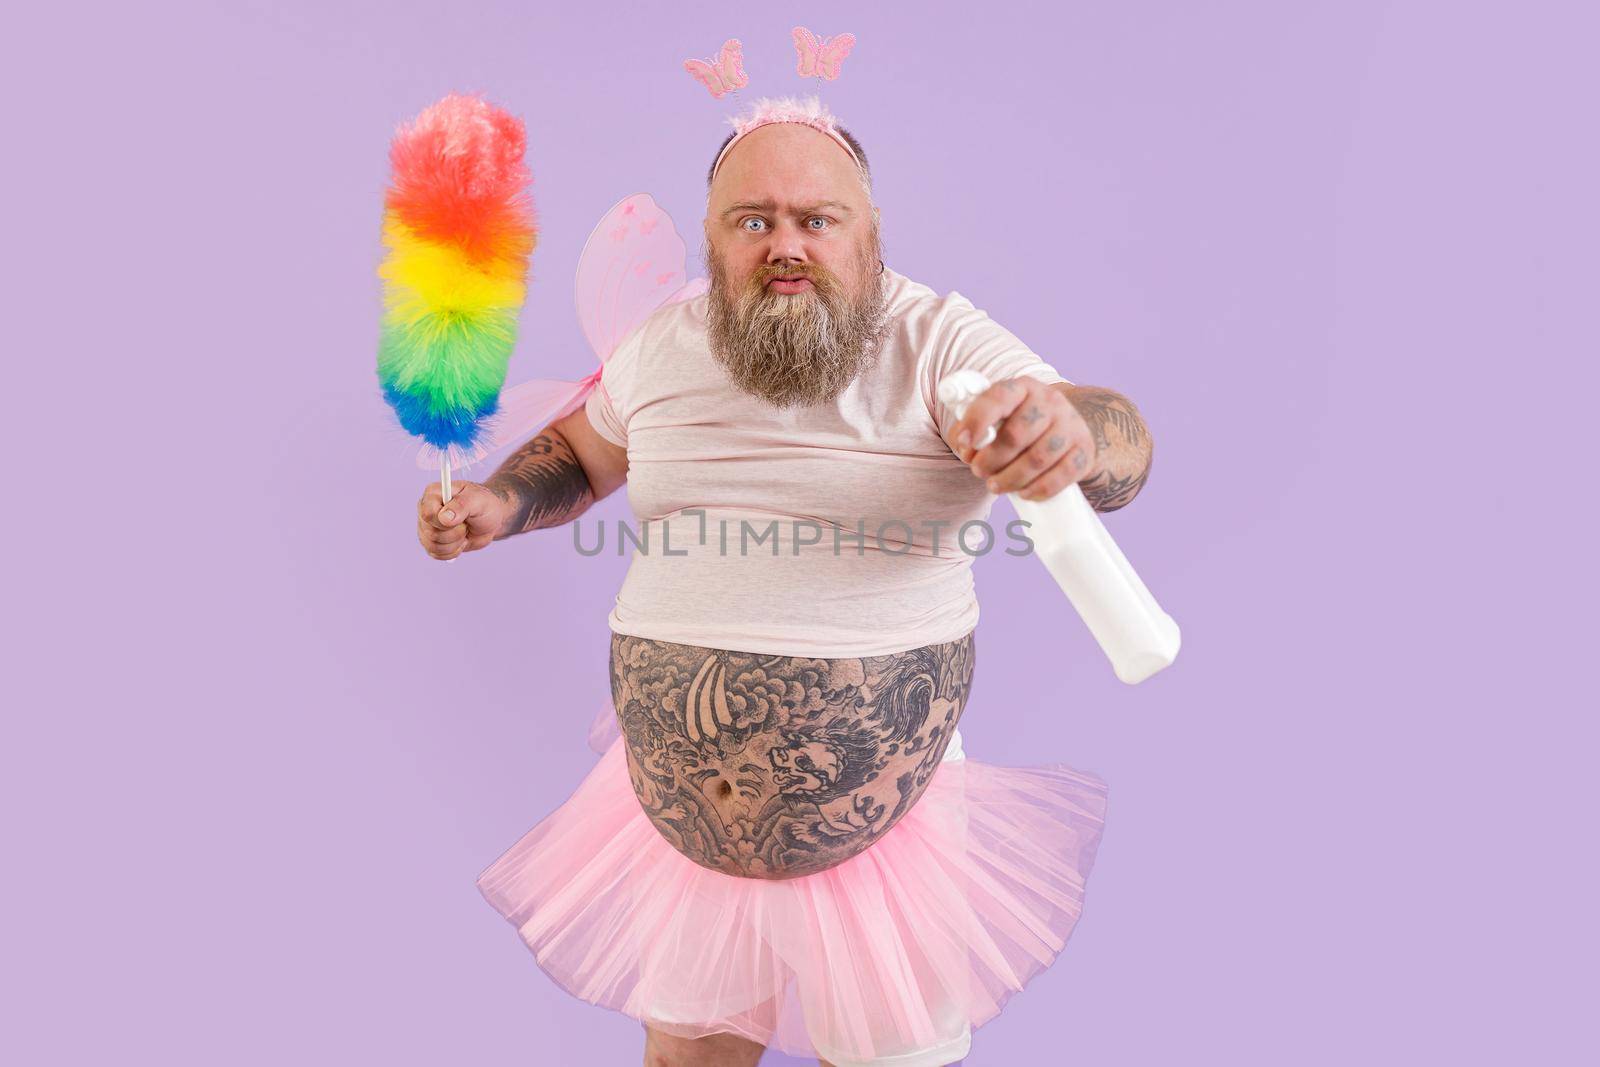 Person with overweight in fairy costume with duster and spray bottle poses on purple background by Yaroslav_astakhov